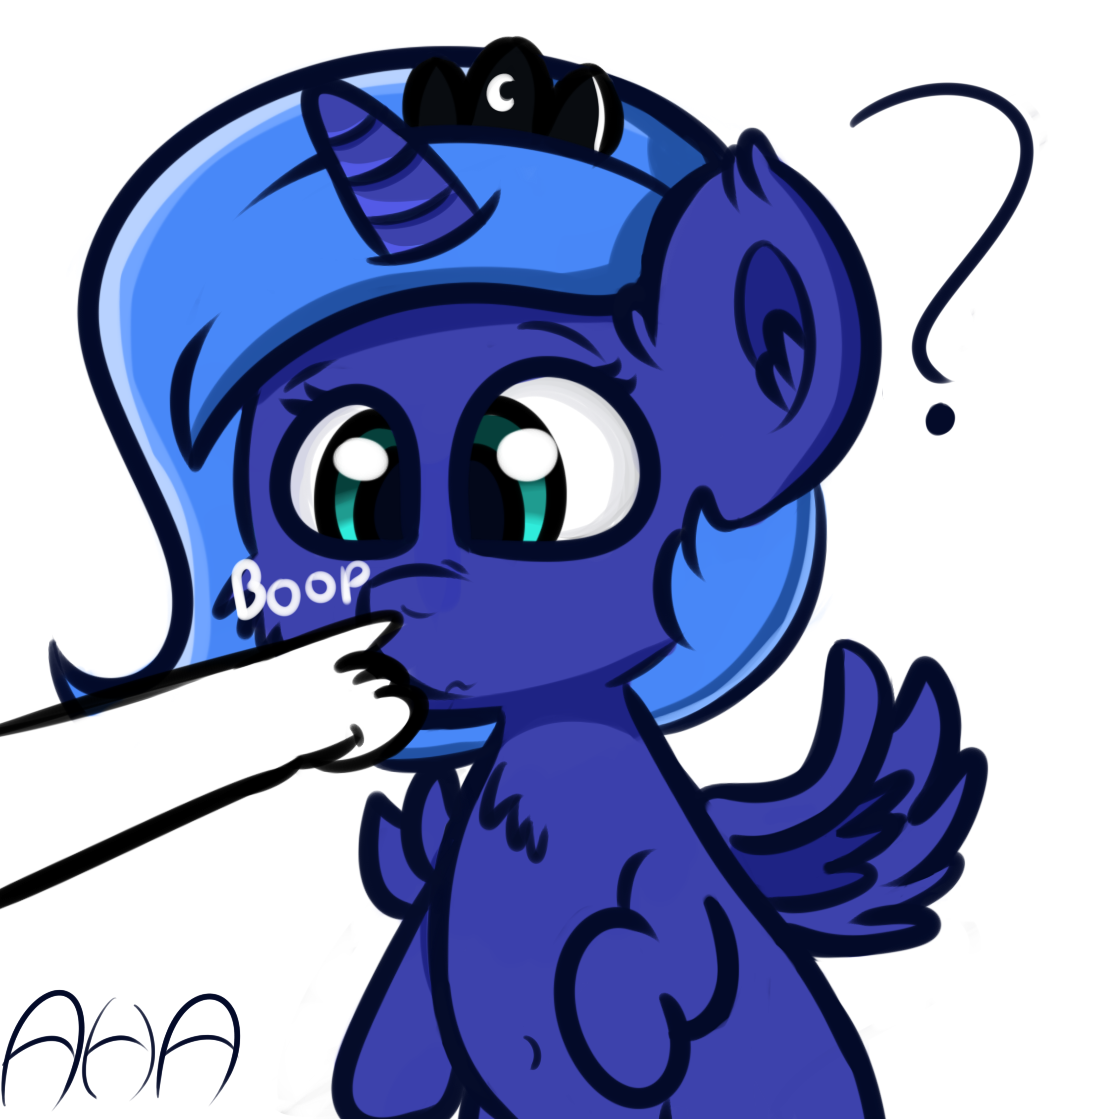 boop_by_anhonestappul-d9ur0ai.png